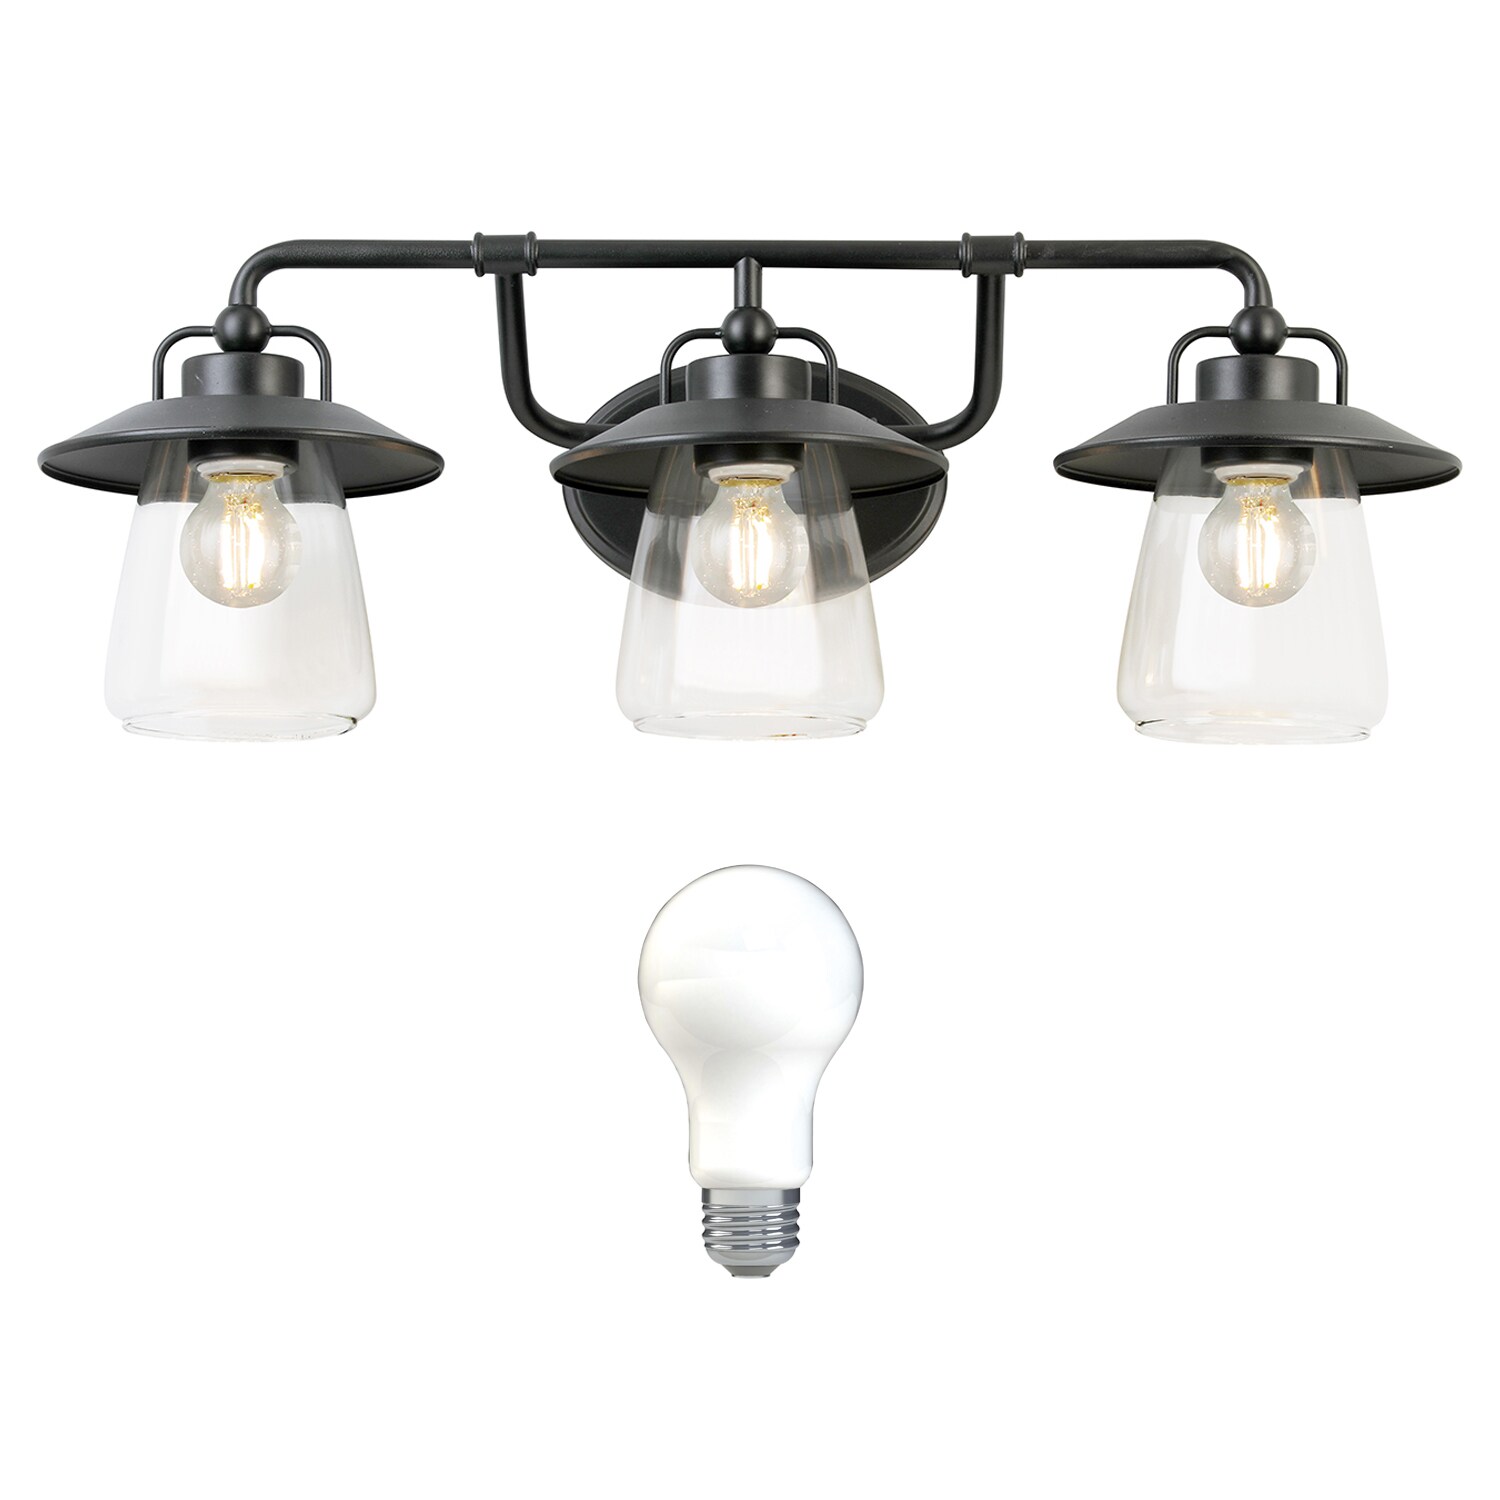 allen + roth Bristow 24-in 3-Light Black Iron Traditional Vanity Light Collection